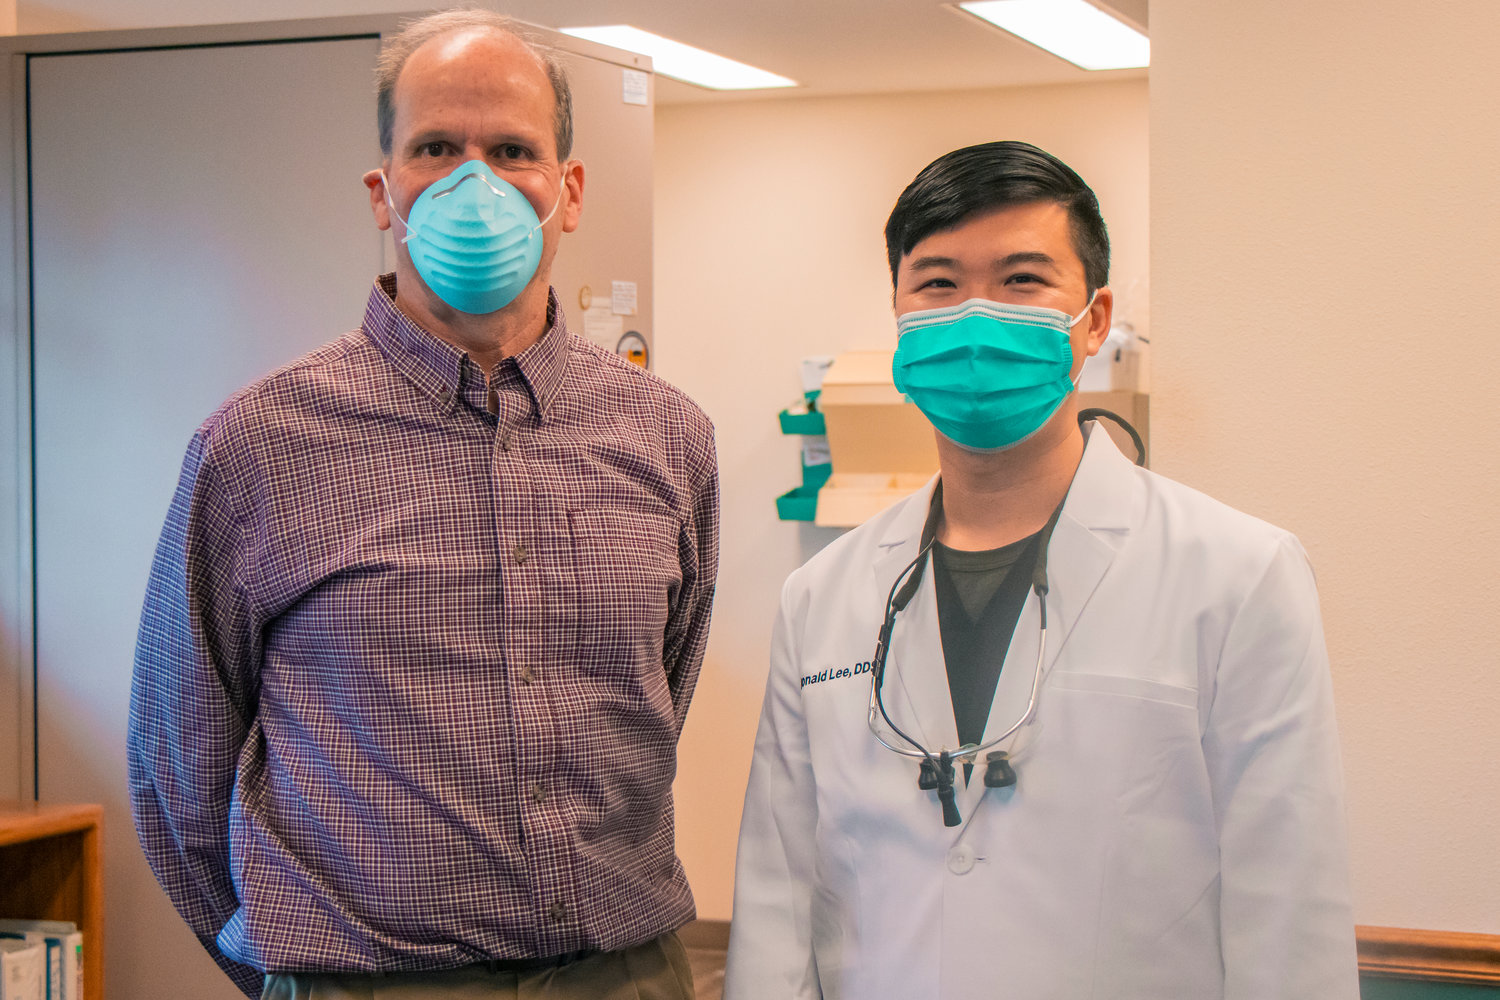 Donald Lee, DDS, left, and James King, DDS, pose for a photo inside the dentistry office located at 228 Harrison Ave. in Centralia.